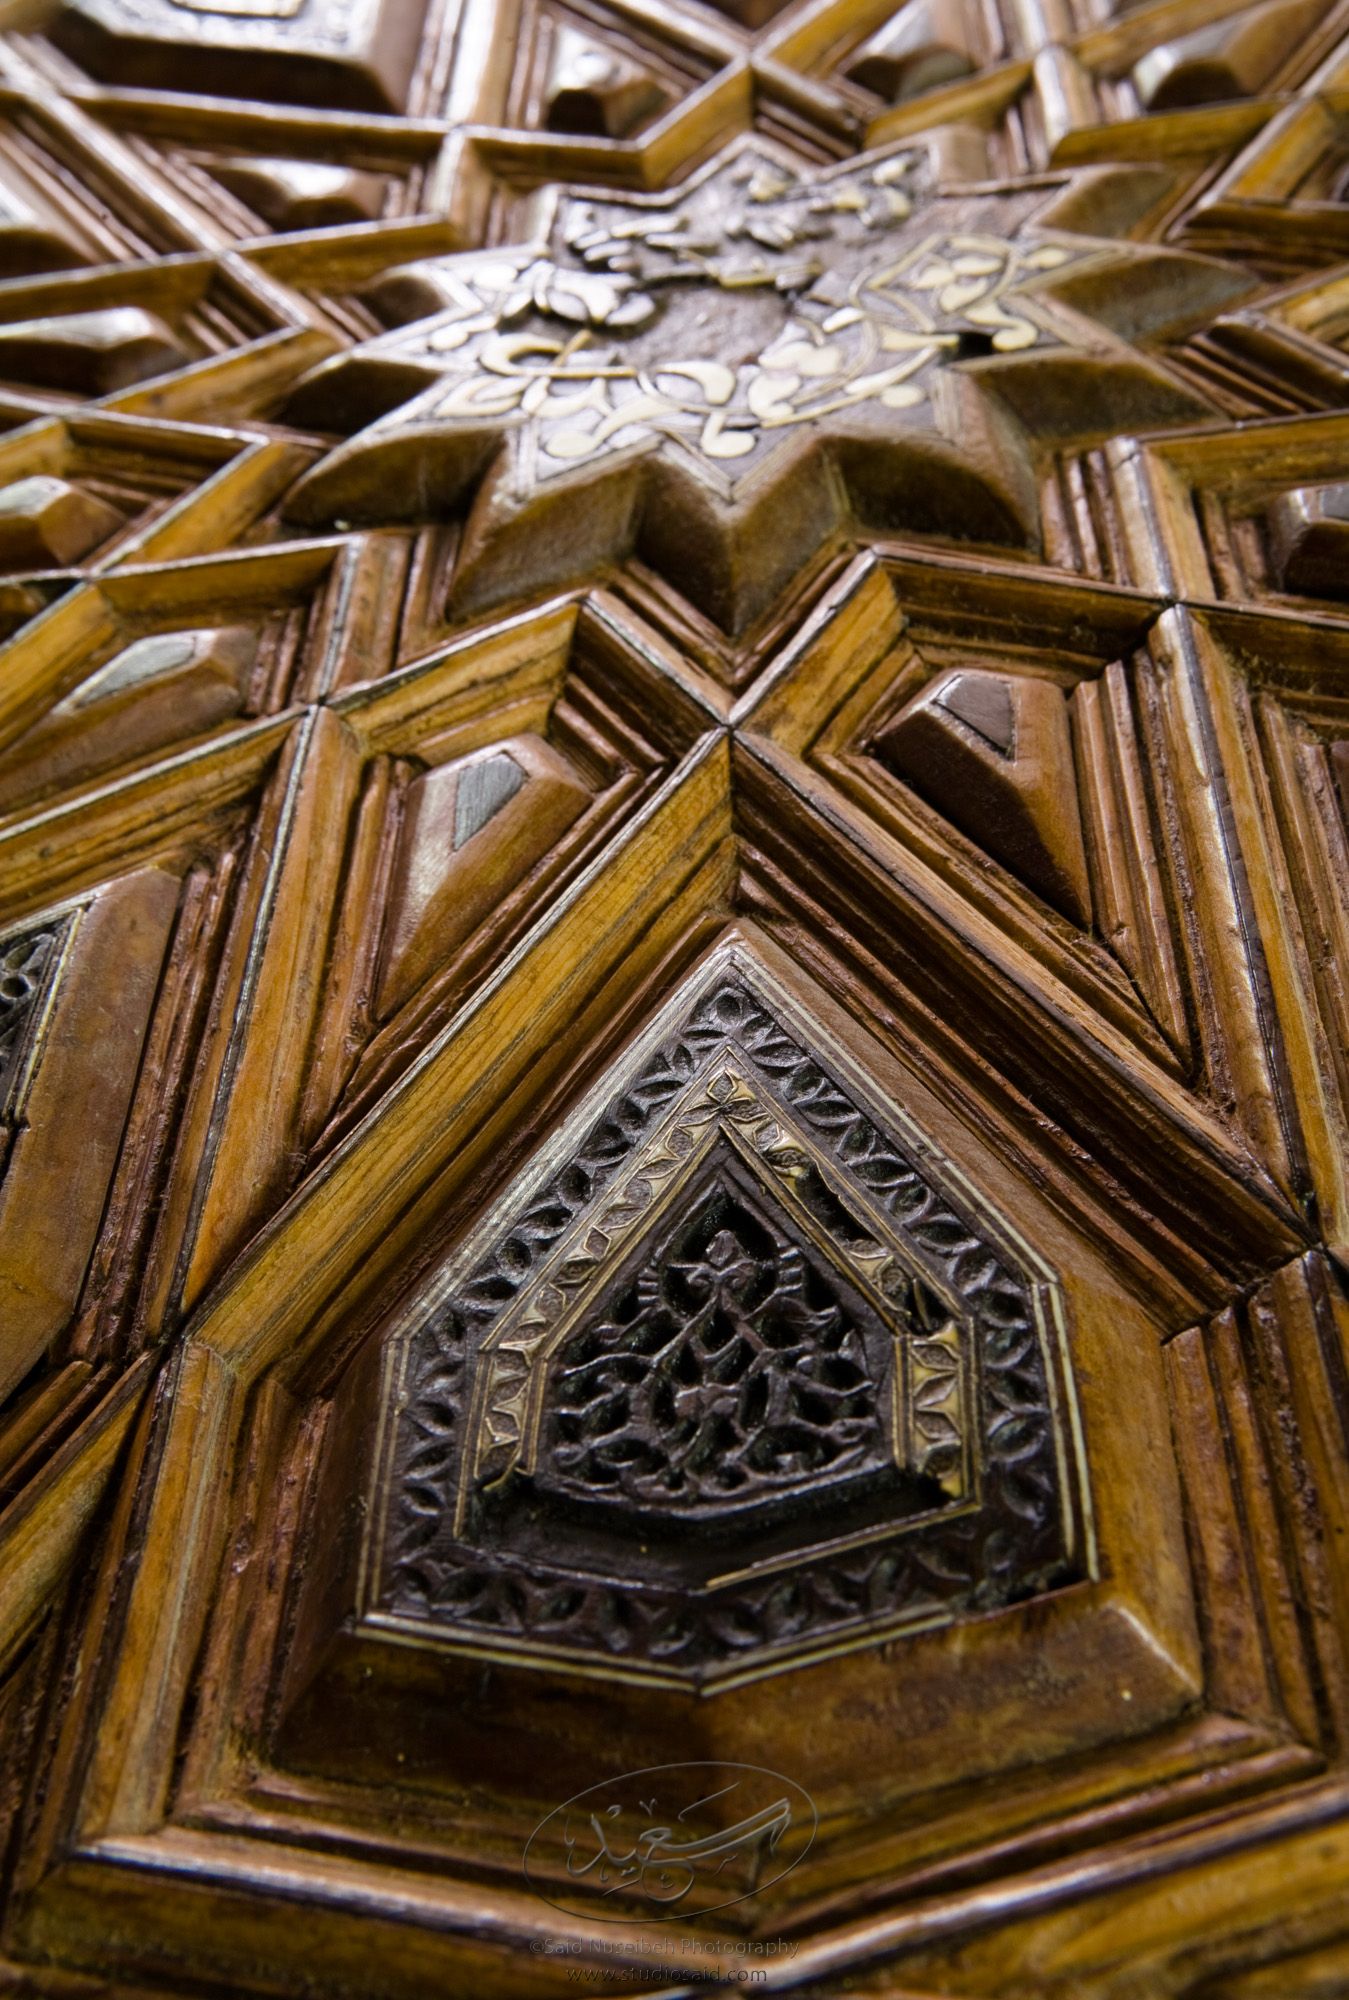 "Broken Star and Interlace Lozenge. Minbar, Carved Woodwork and Inlay Detail"The late-13th / early-14th c. Mamluk minbar, or pulpit, of Sultan al-Nasir Muhammad, the ninth Mamluk Sultan from Cairo and son of Qalawun. The minbar was located in the Umayyad Mosque in Aleppo, Haleb, prior to its damage and disappearance in May 2013.